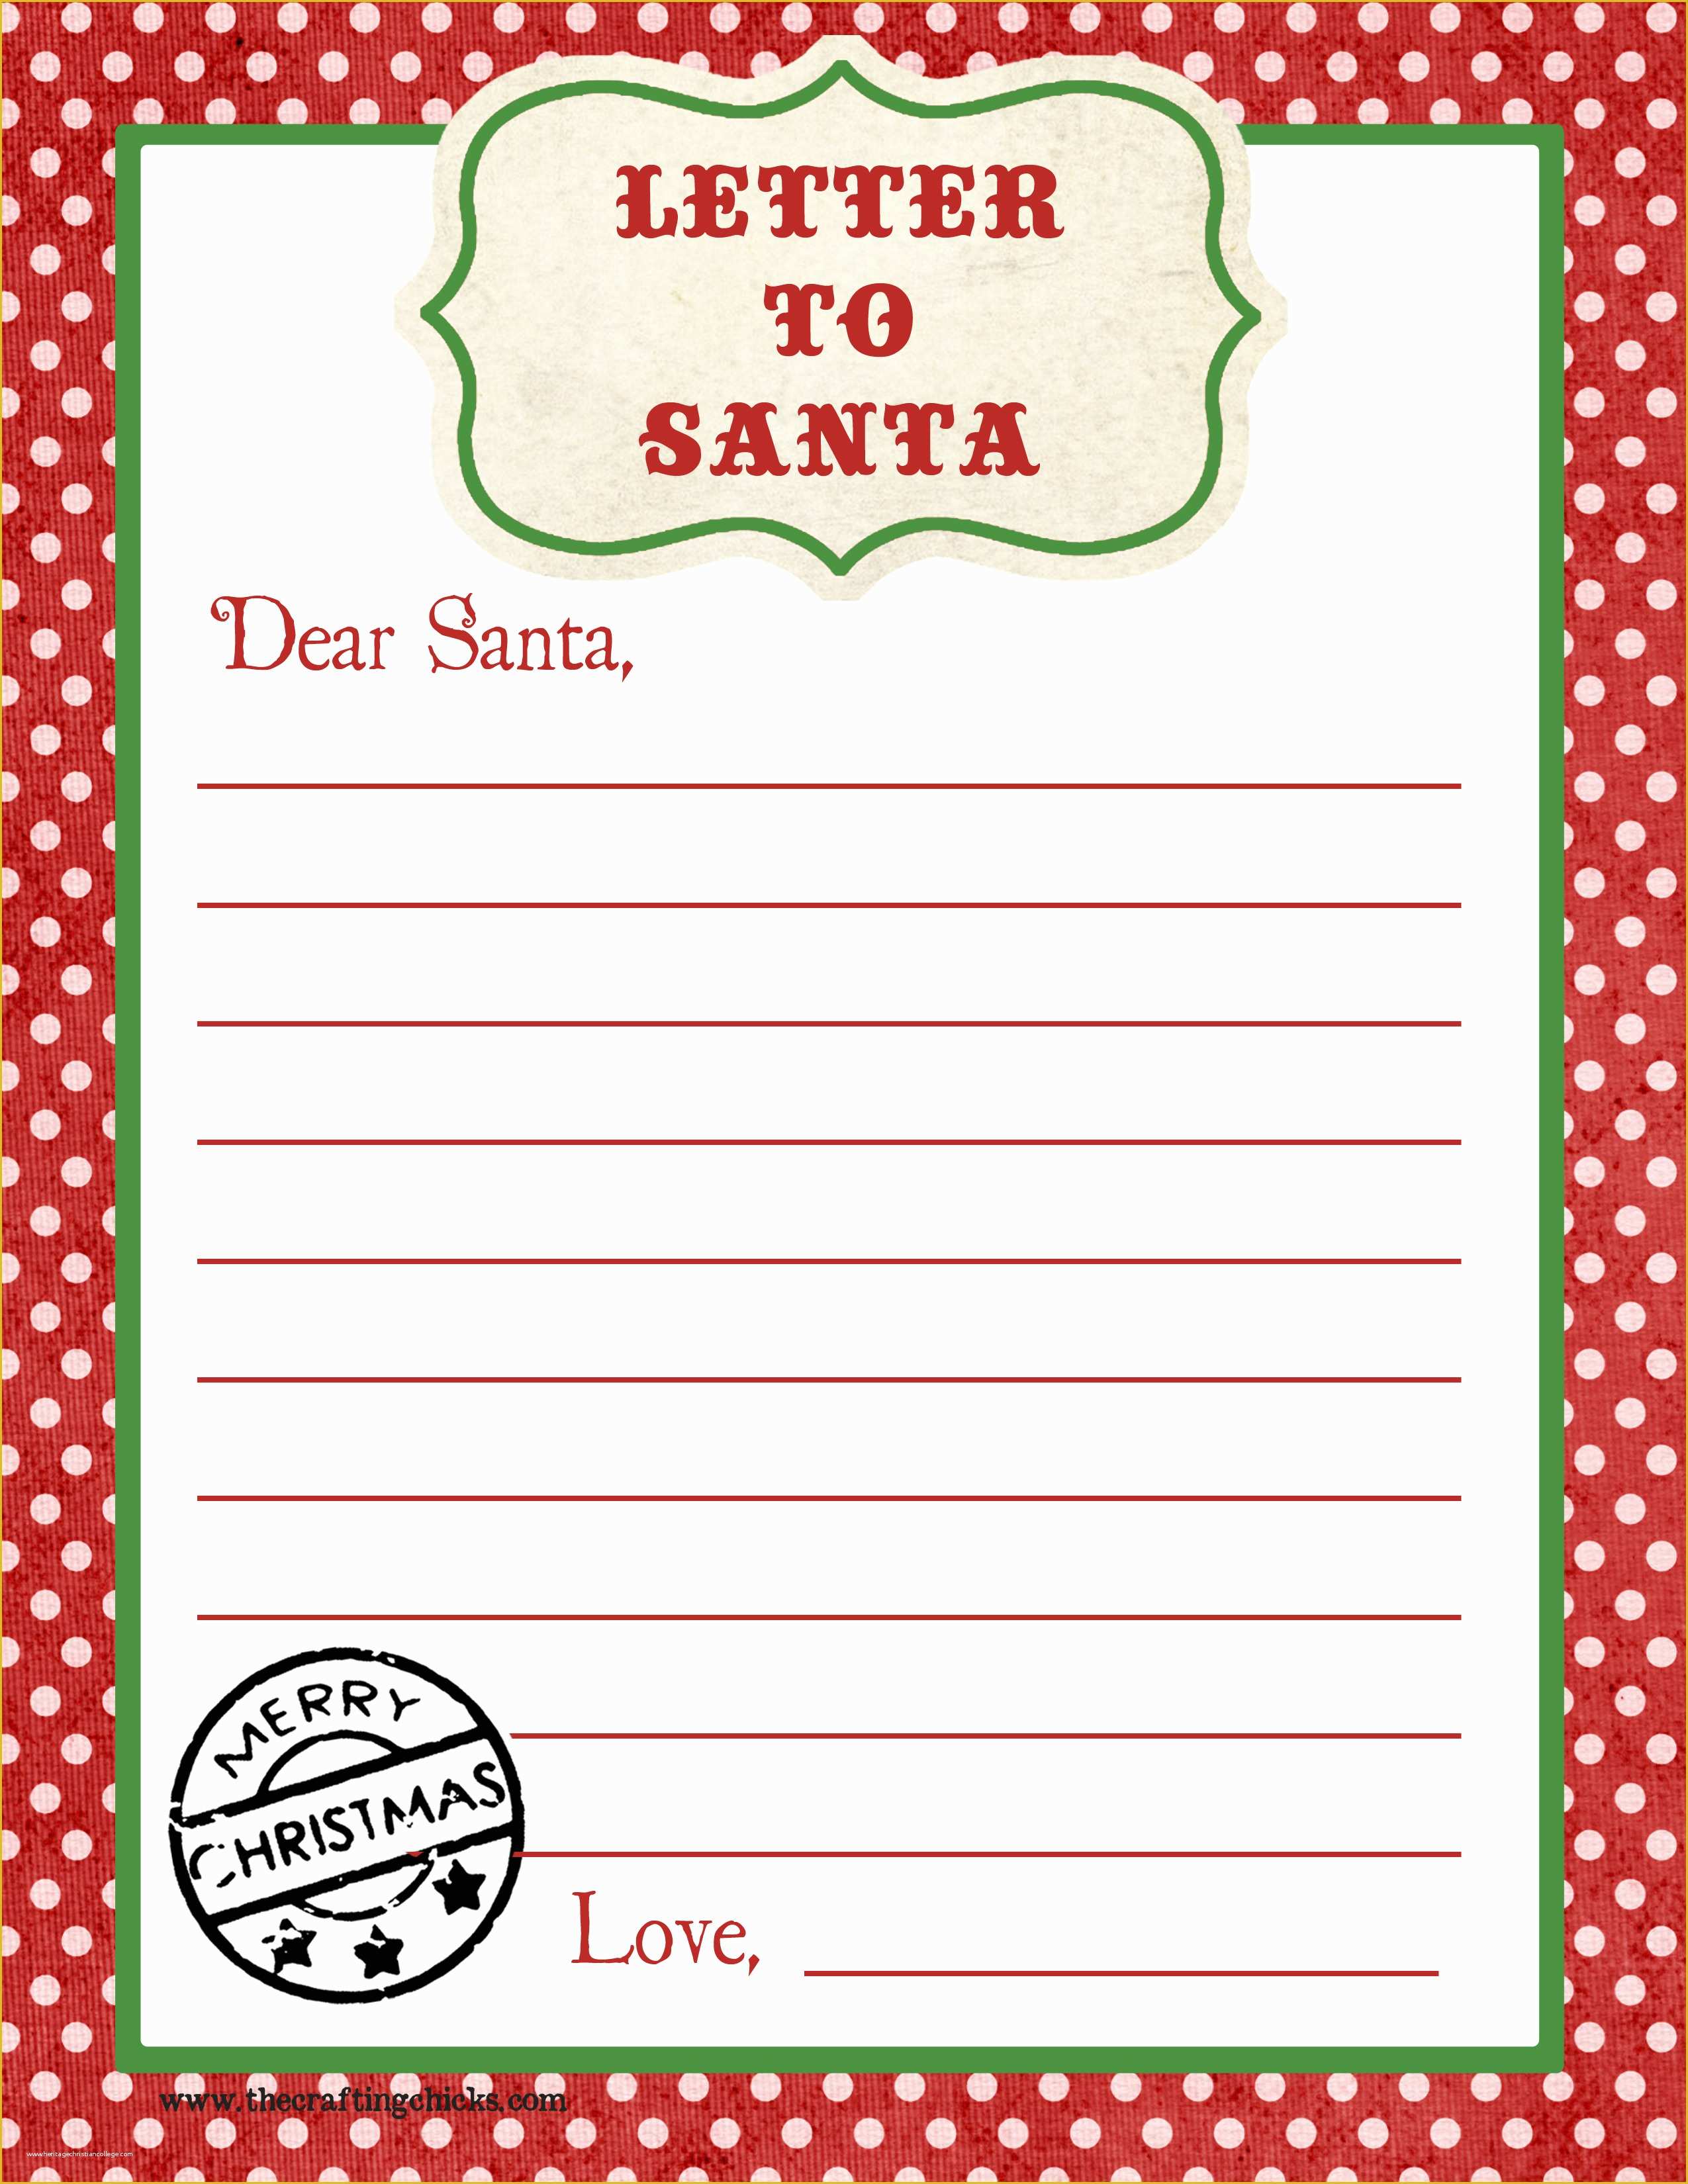 Free Letter to Santa Template Of Letter to Santa Free Printable Download